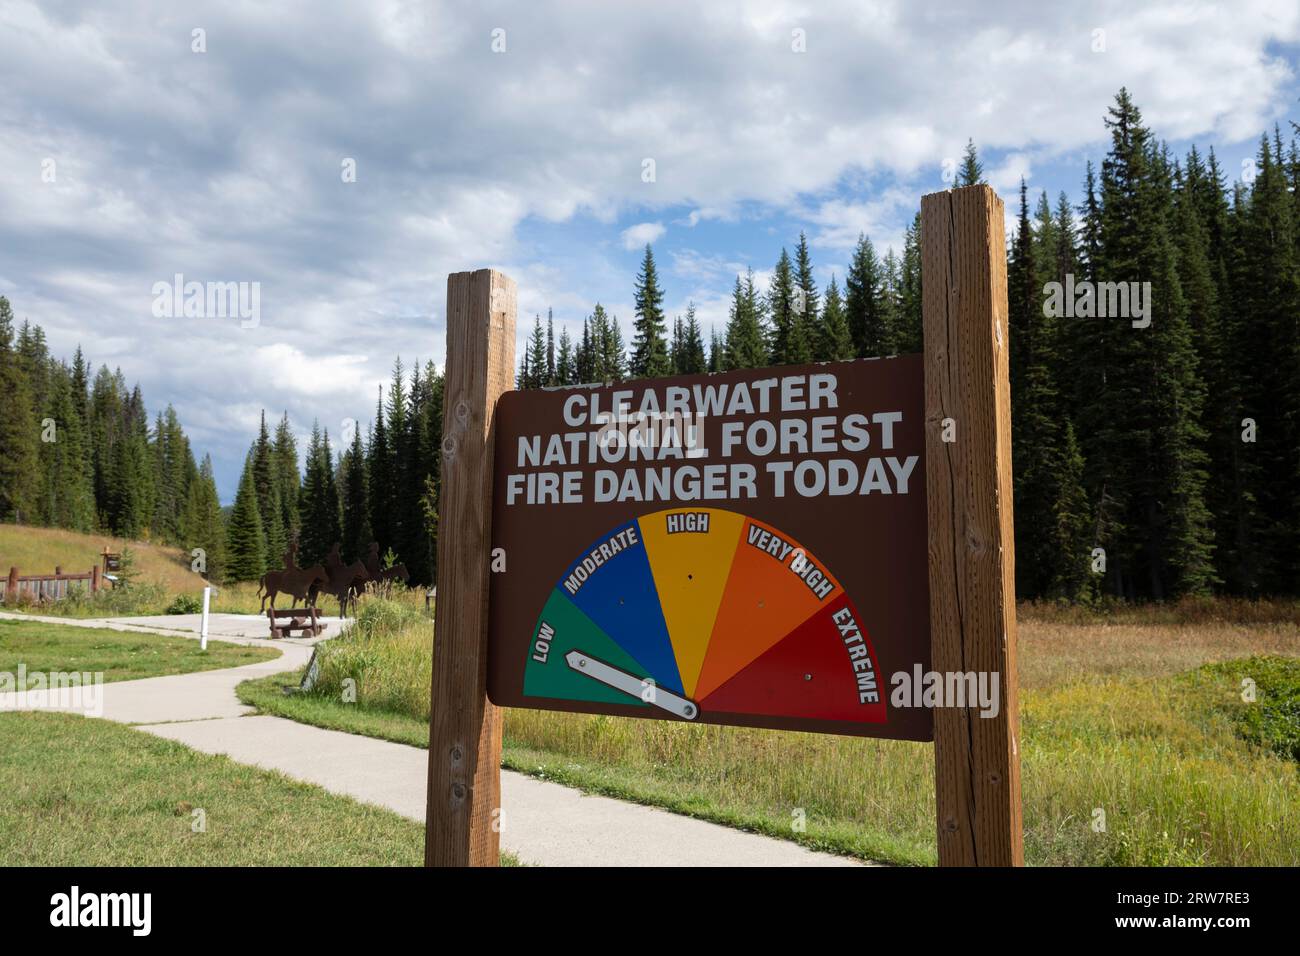 A fire danger sign warns of low wildfire danger at Lolo Pass Visitor Center, Lolo Pass, Idaho. Stock Photo